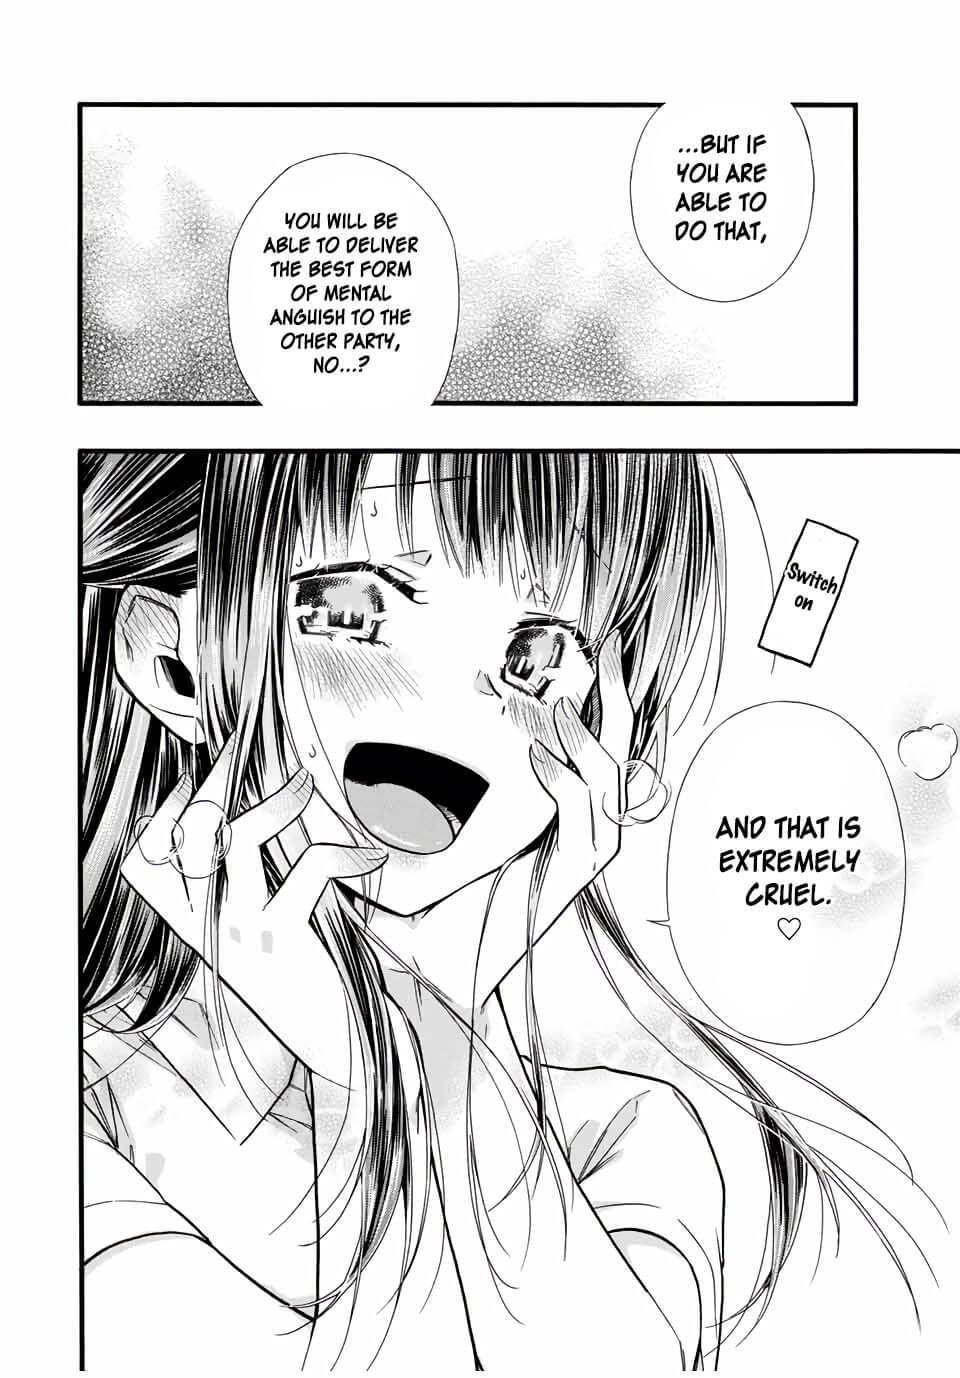 Even If I Die With Miss Asanami, I Want to Cum ch.12